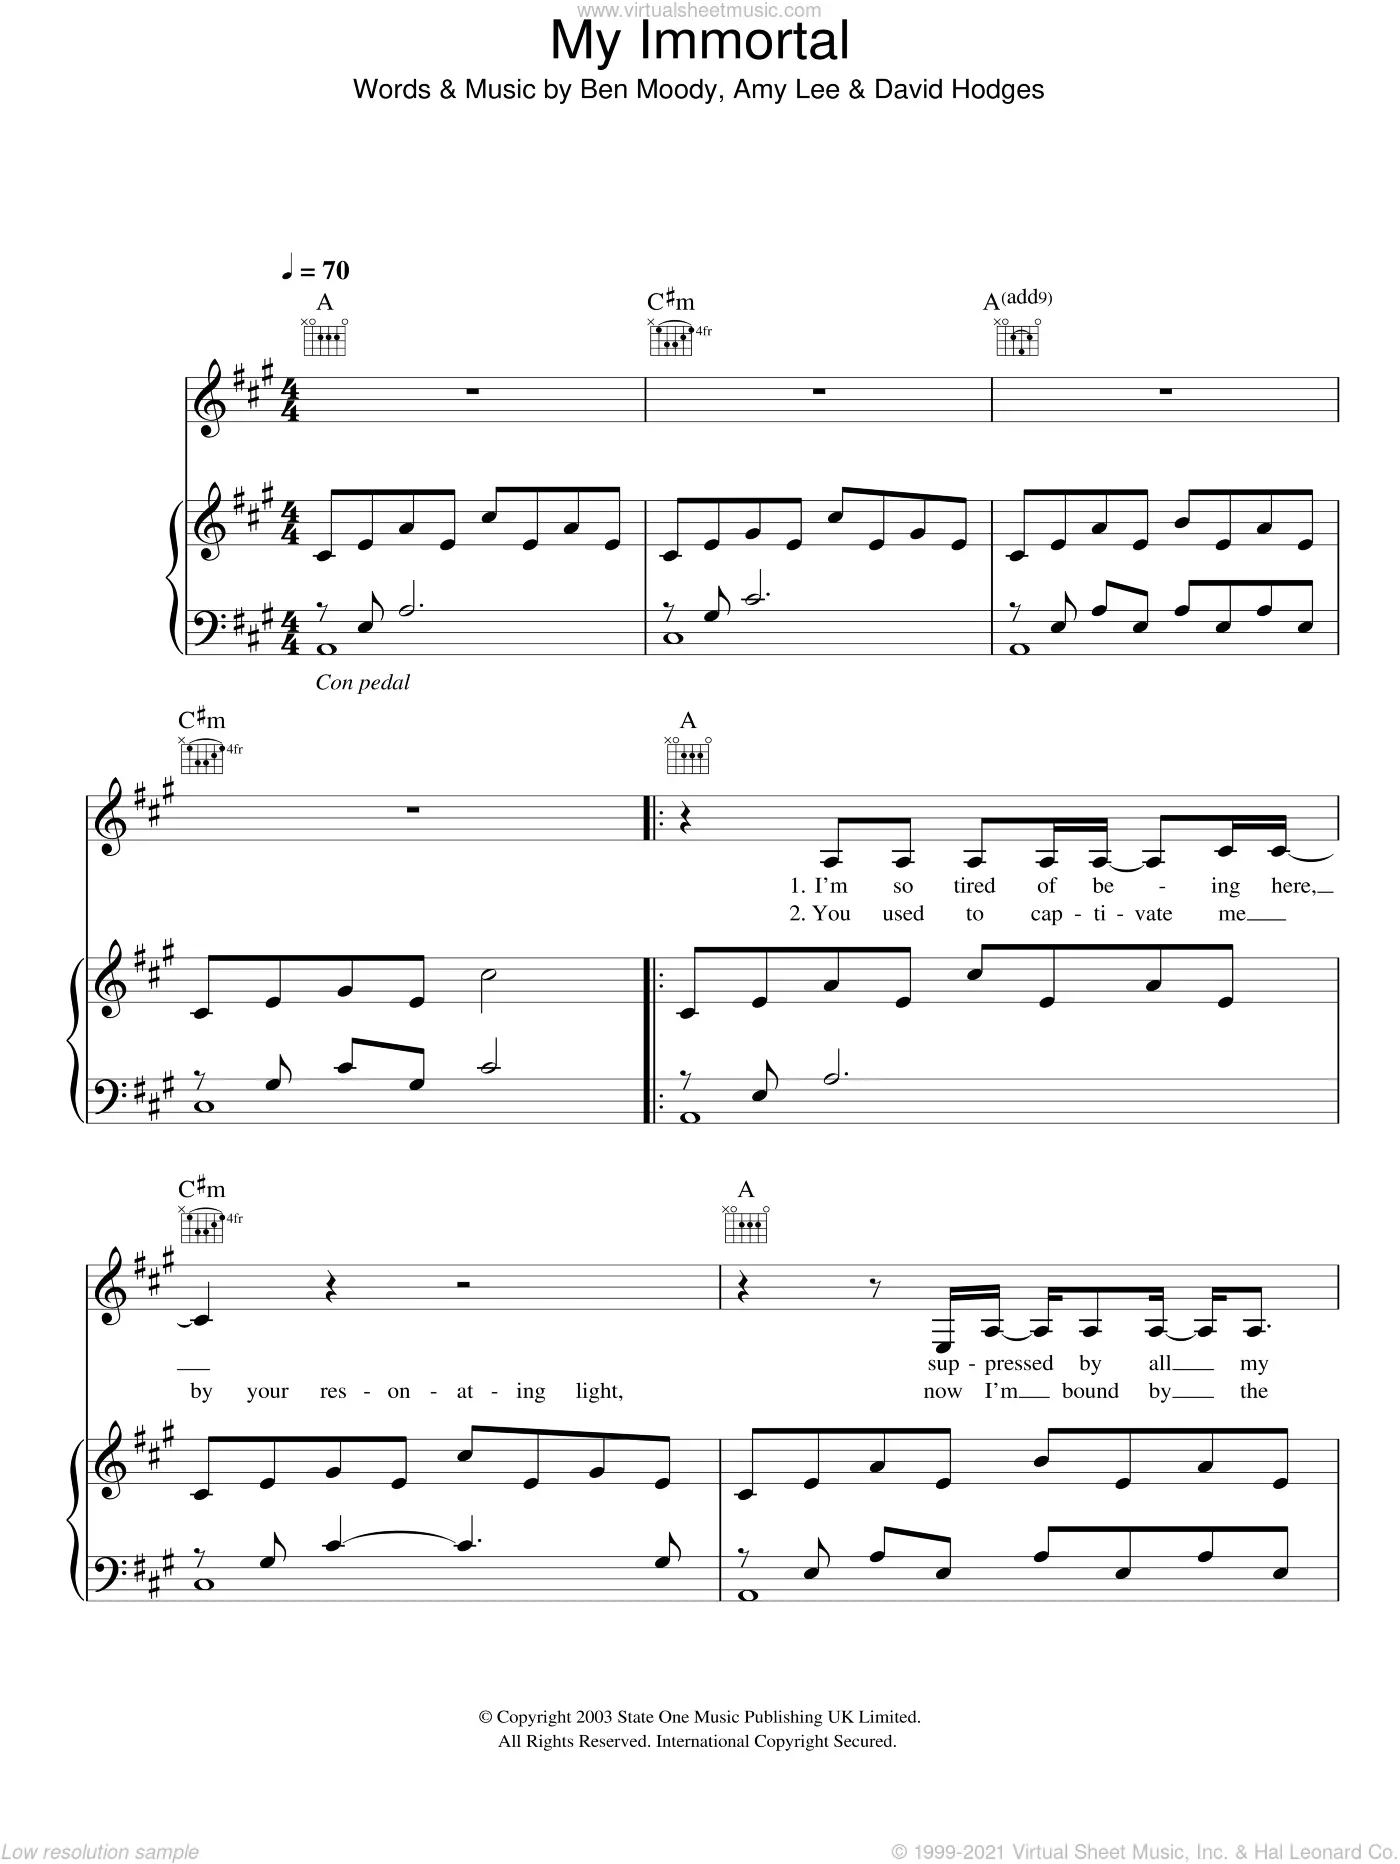  SONGBOOK Piano Partition Evanescence  Chant & billets  The Piano Guitare Style of Amy Lee  